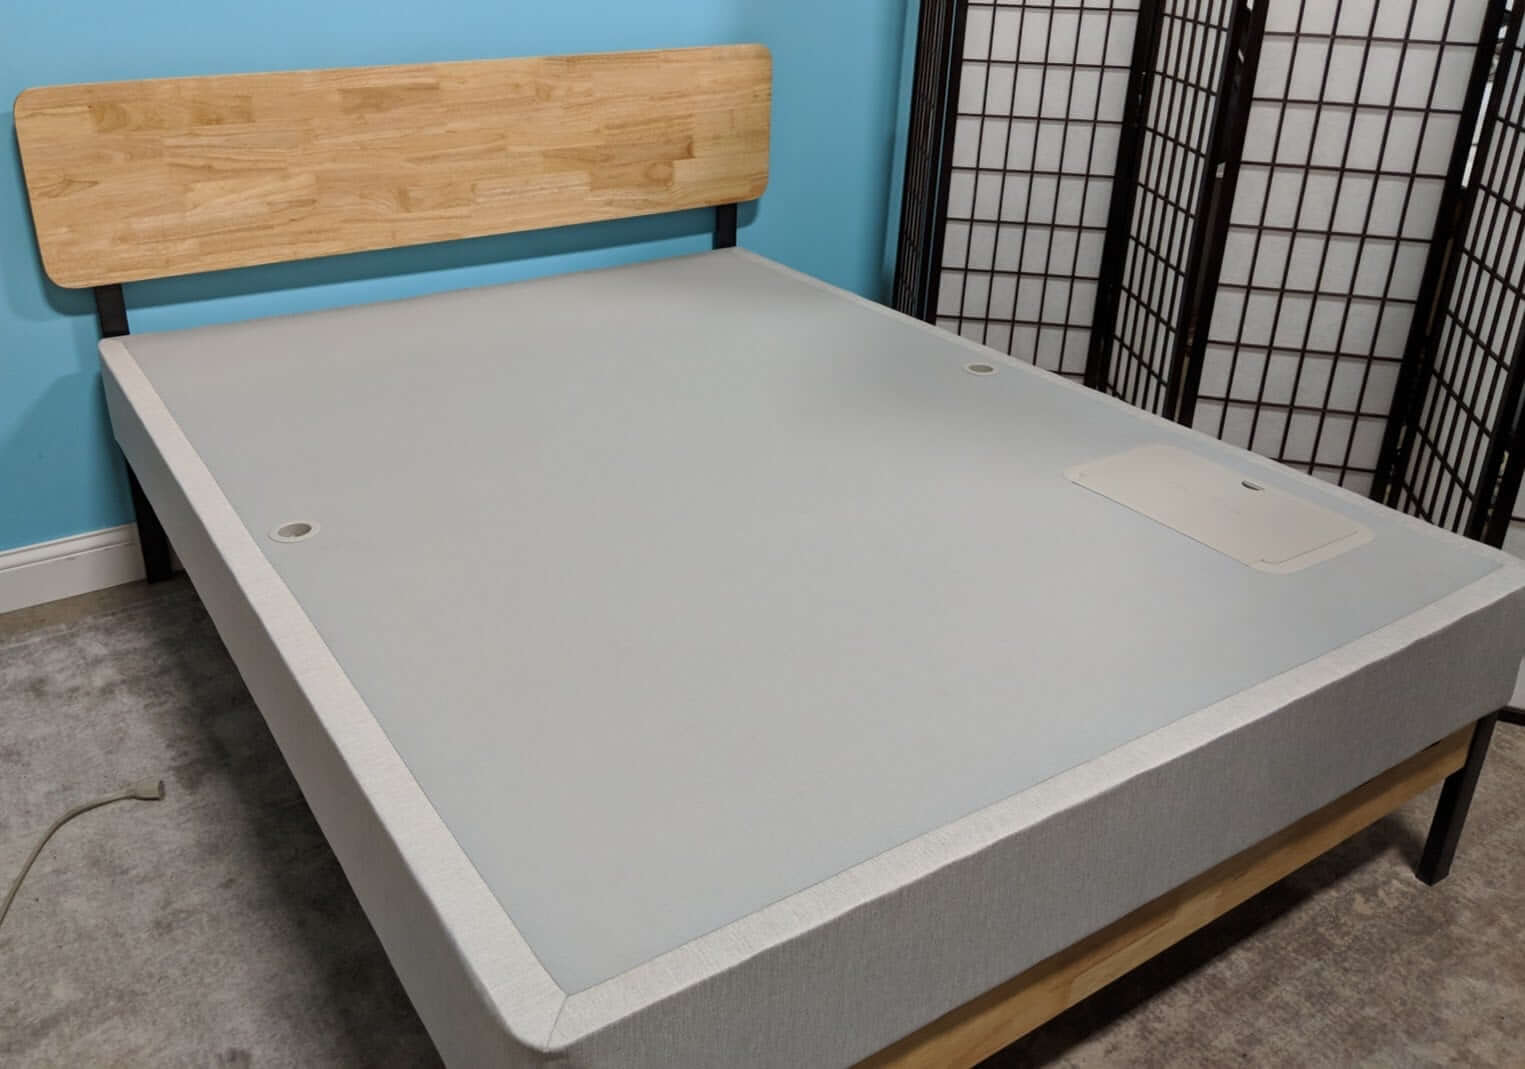 Sleep Number C2 Mattress Review, How To Move A Sleep Number C2 Bed